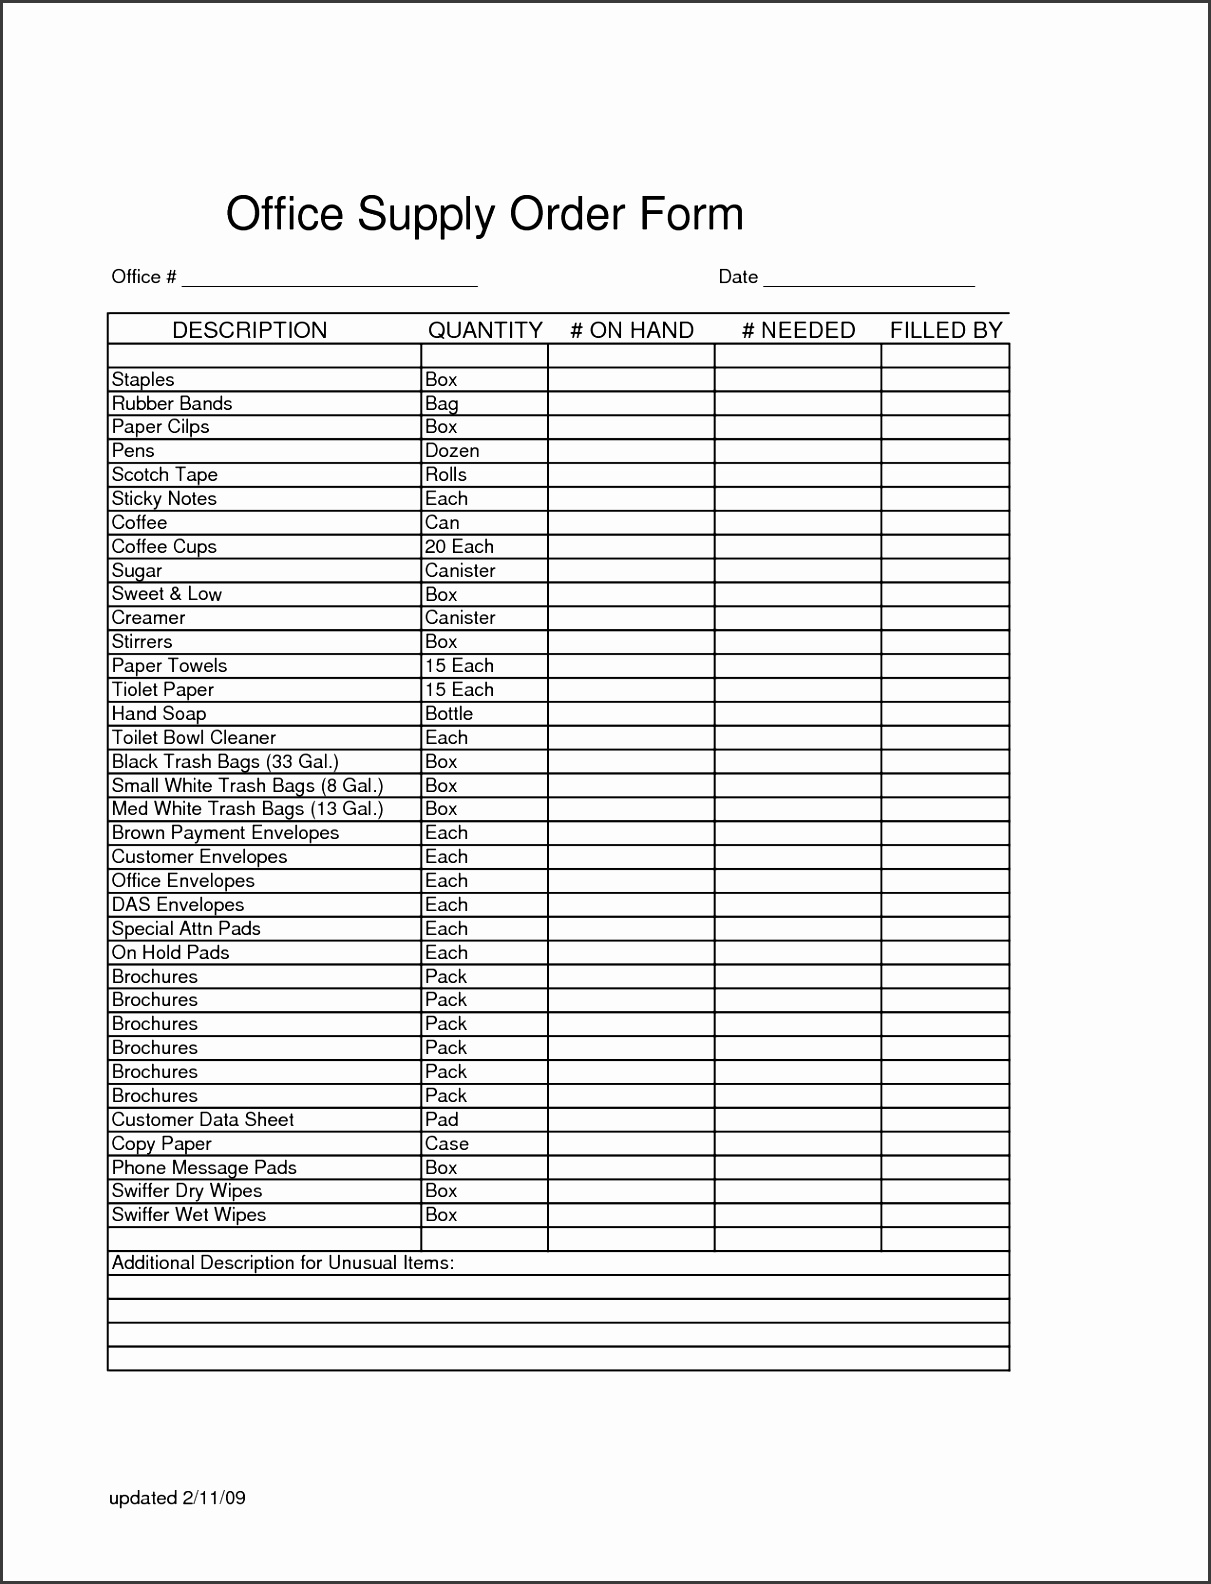 fice Supply Order Form Template